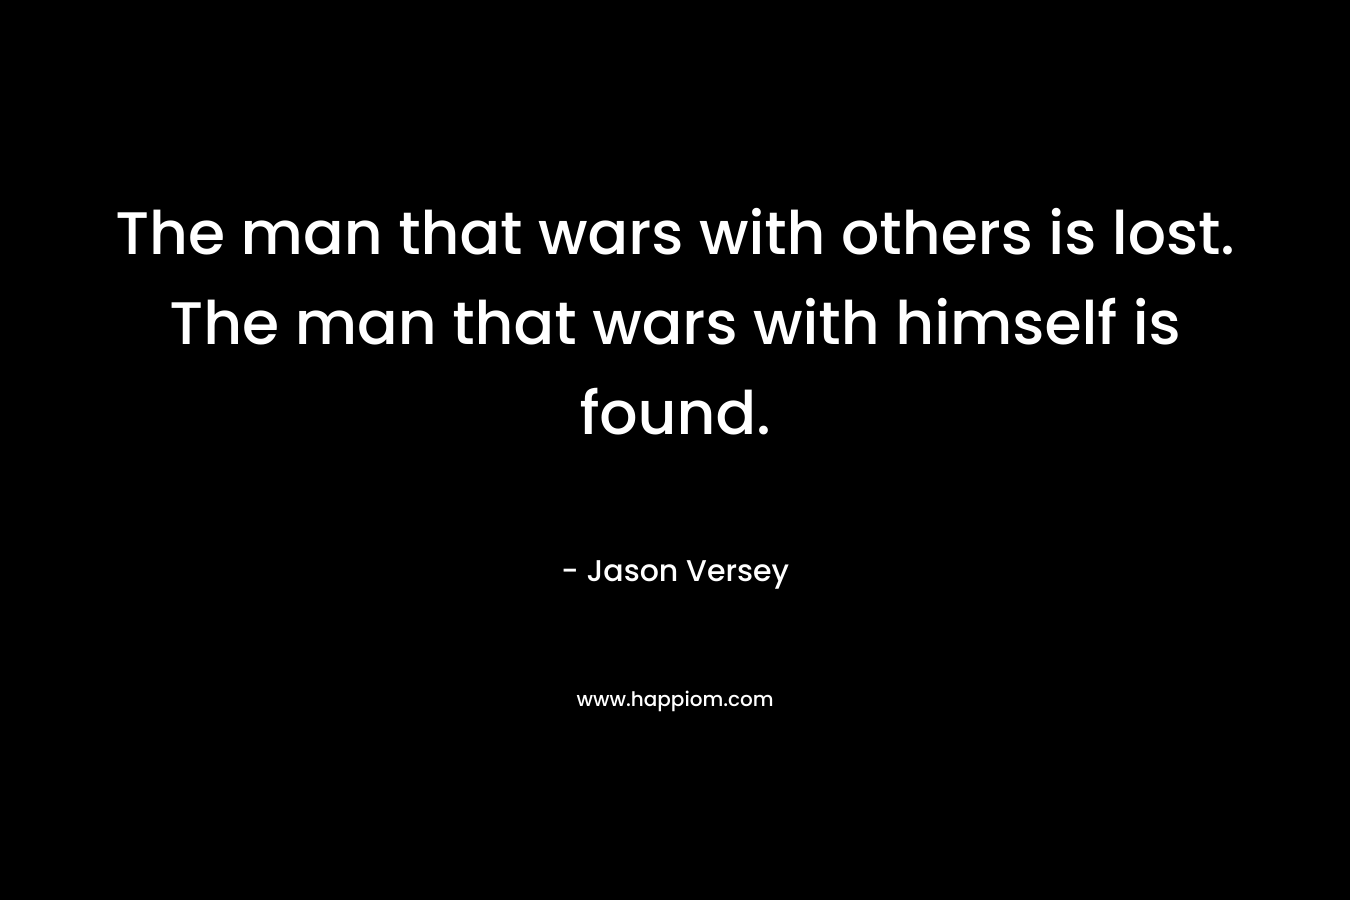 The man that wars with others is lost. The man that wars with himself is found. – Jason Versey